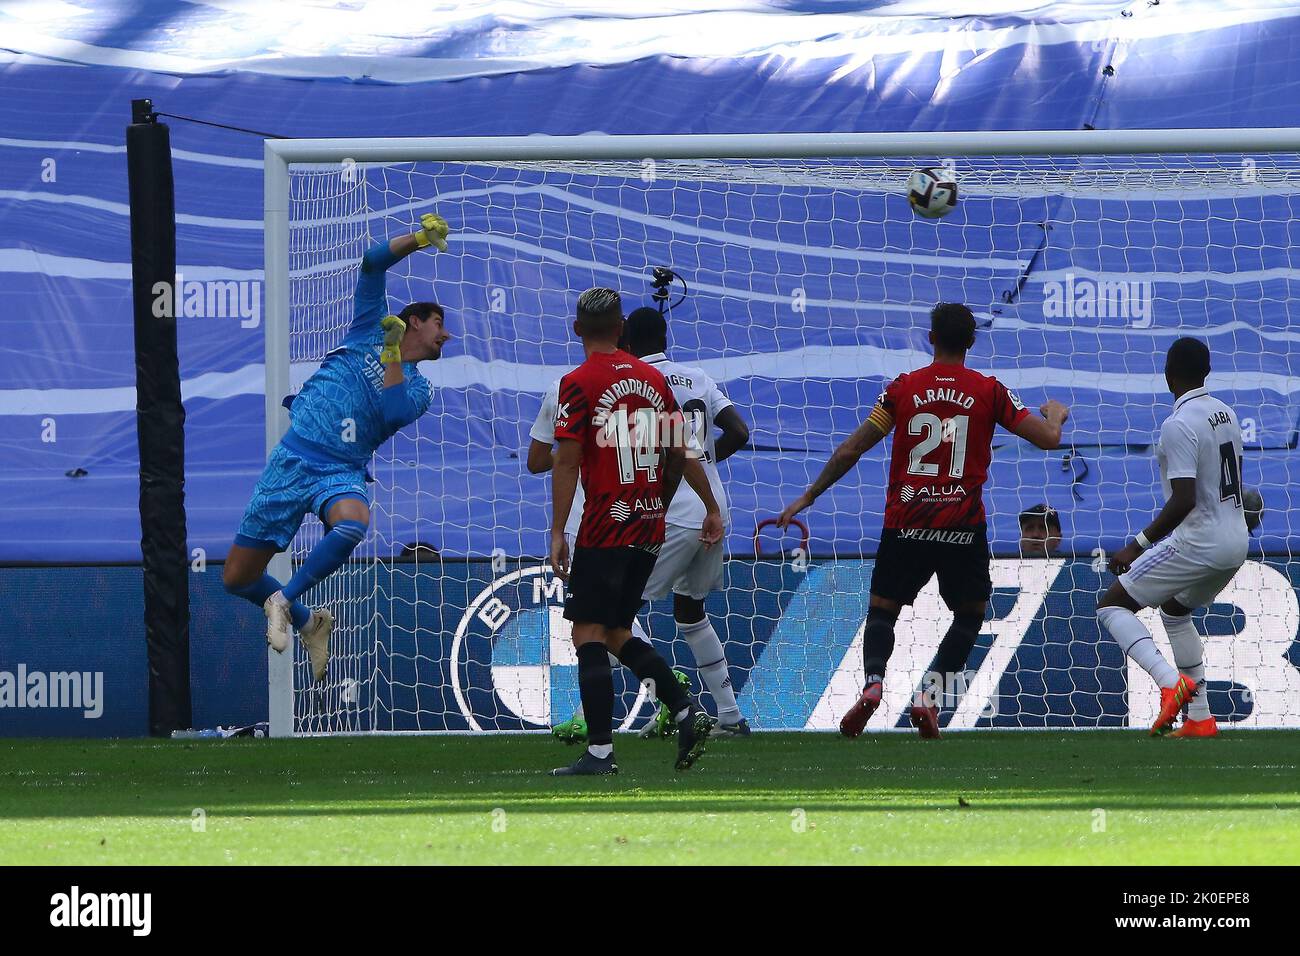 Madrid, Spain. 11th September, 2022. Mallorca scores goal during La Liga match day 5 between Real Madrid and Mallorca at Santiago Bernabeu Stadium in Madrid, Spain, on September 11, 2022. Credit: Edward F. Peters/Alamy Live News Stock Photo